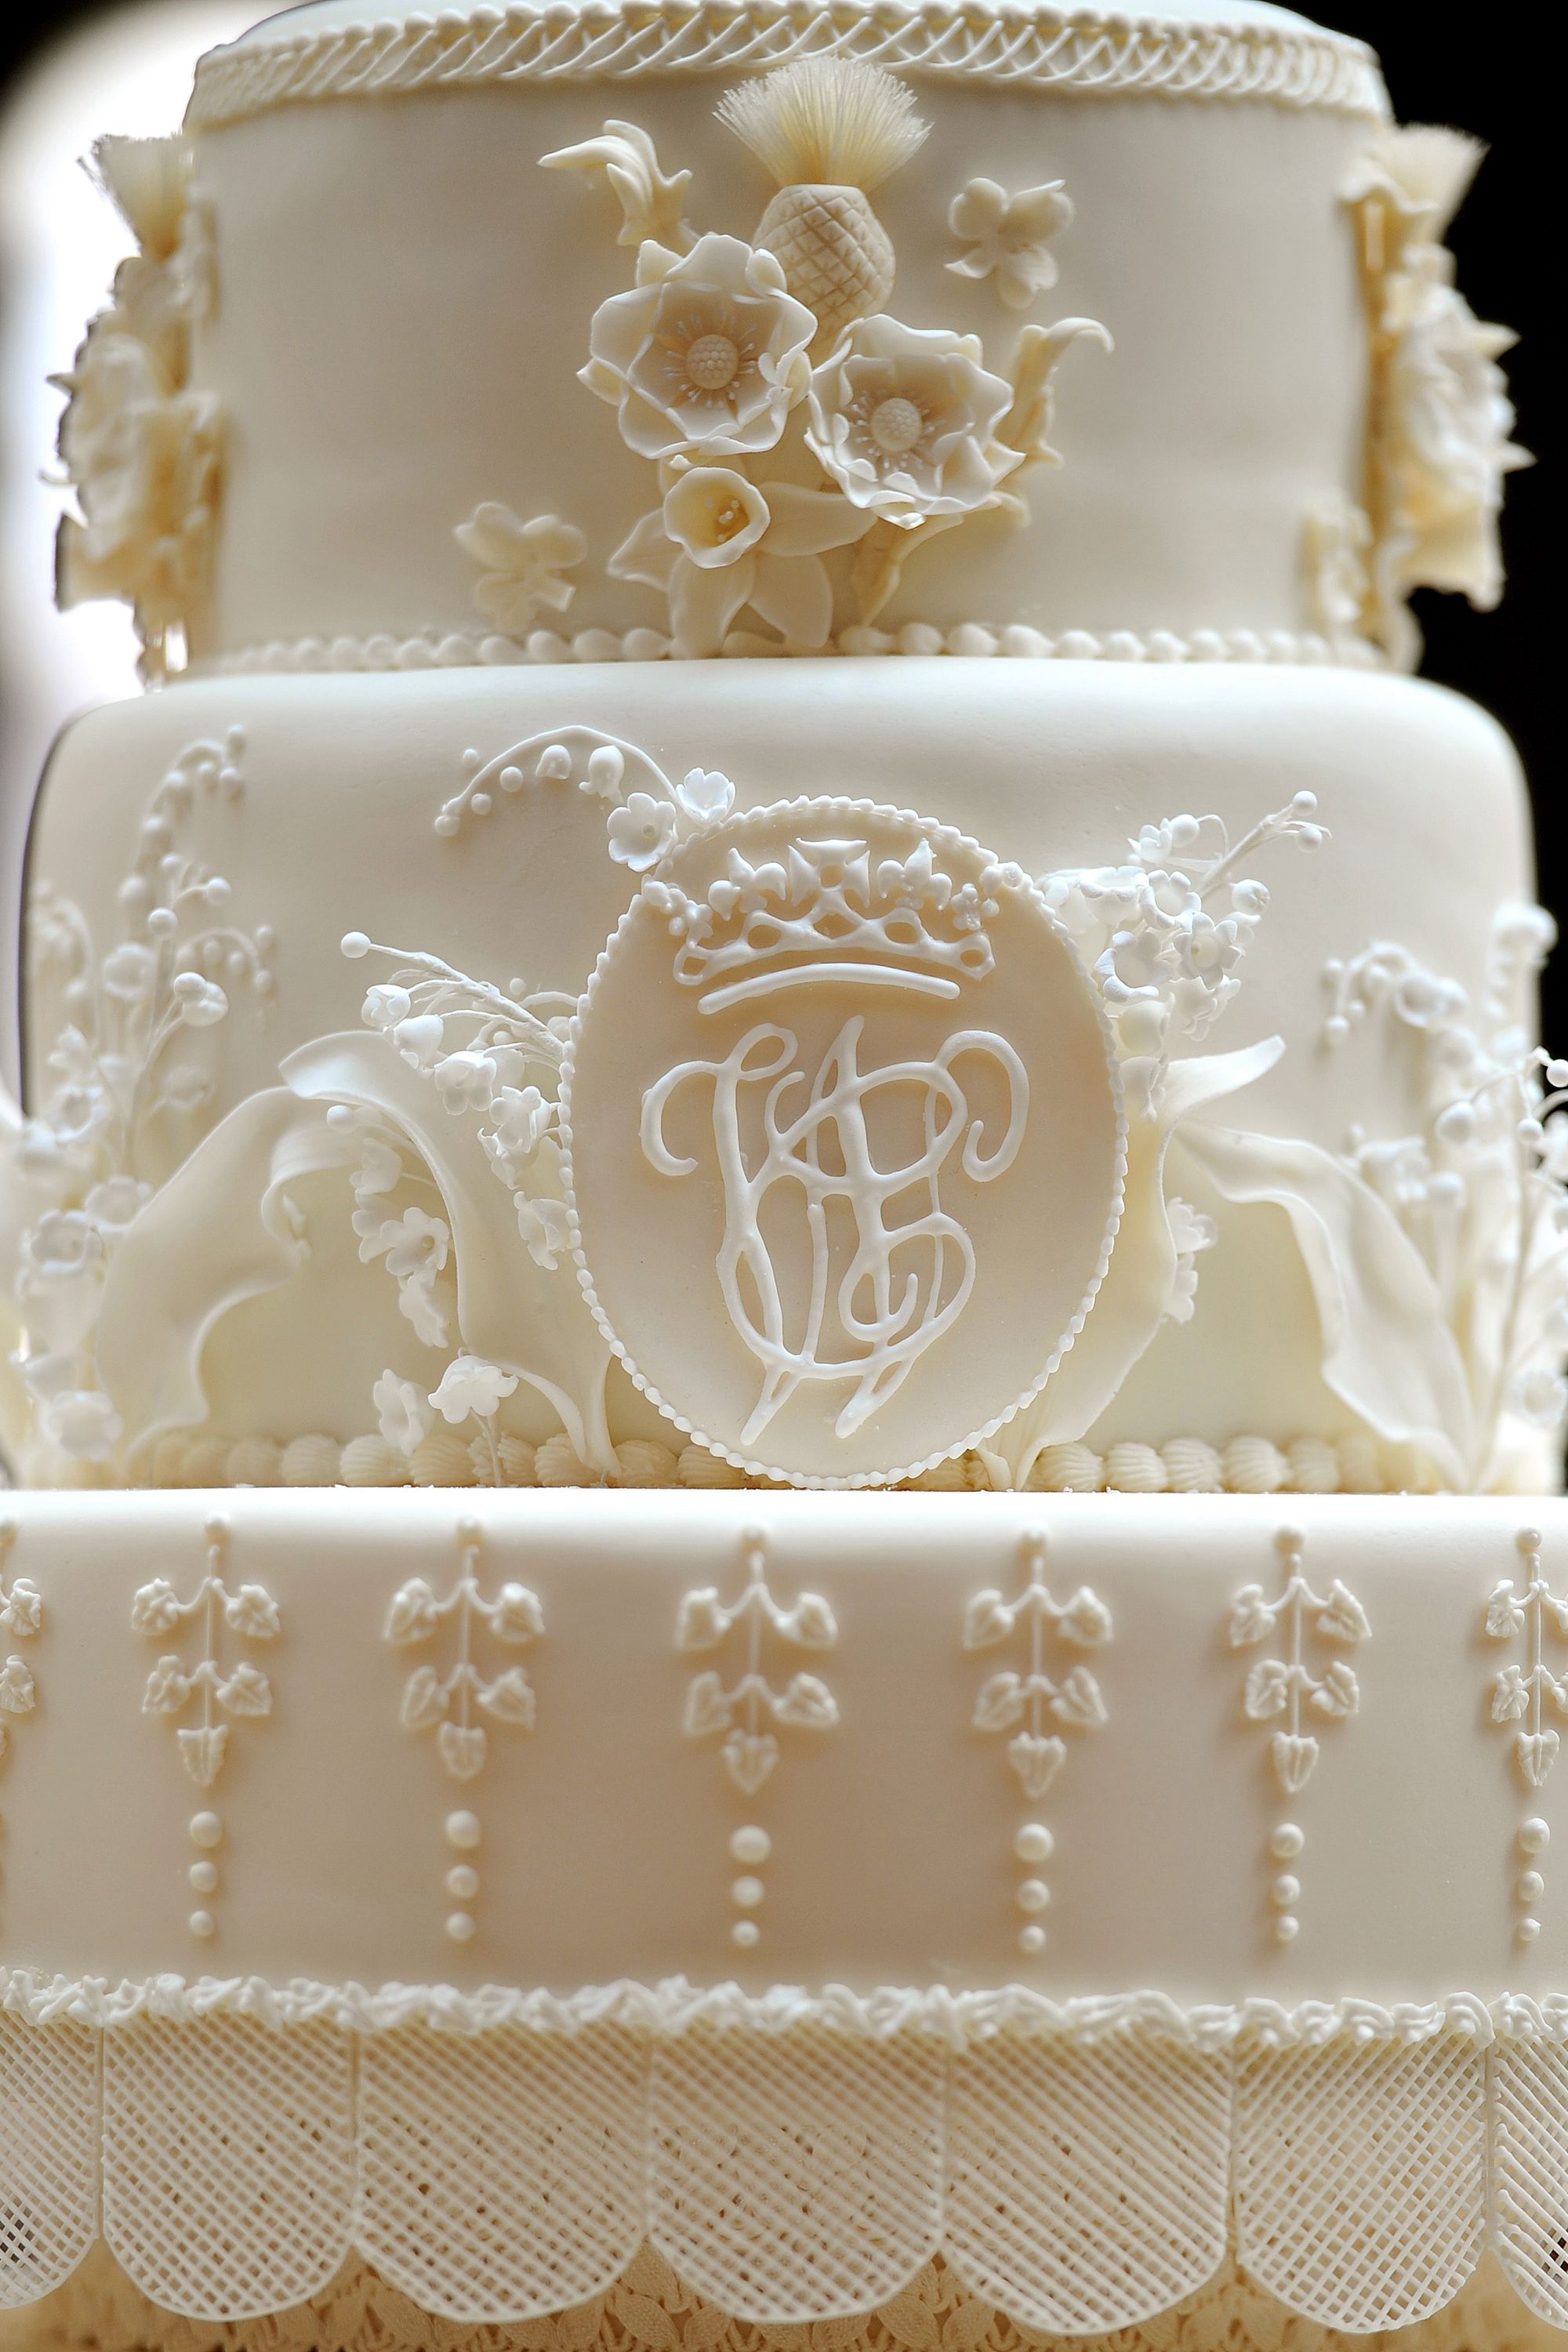 The Best and Worst Celebrity Wedding Cakes